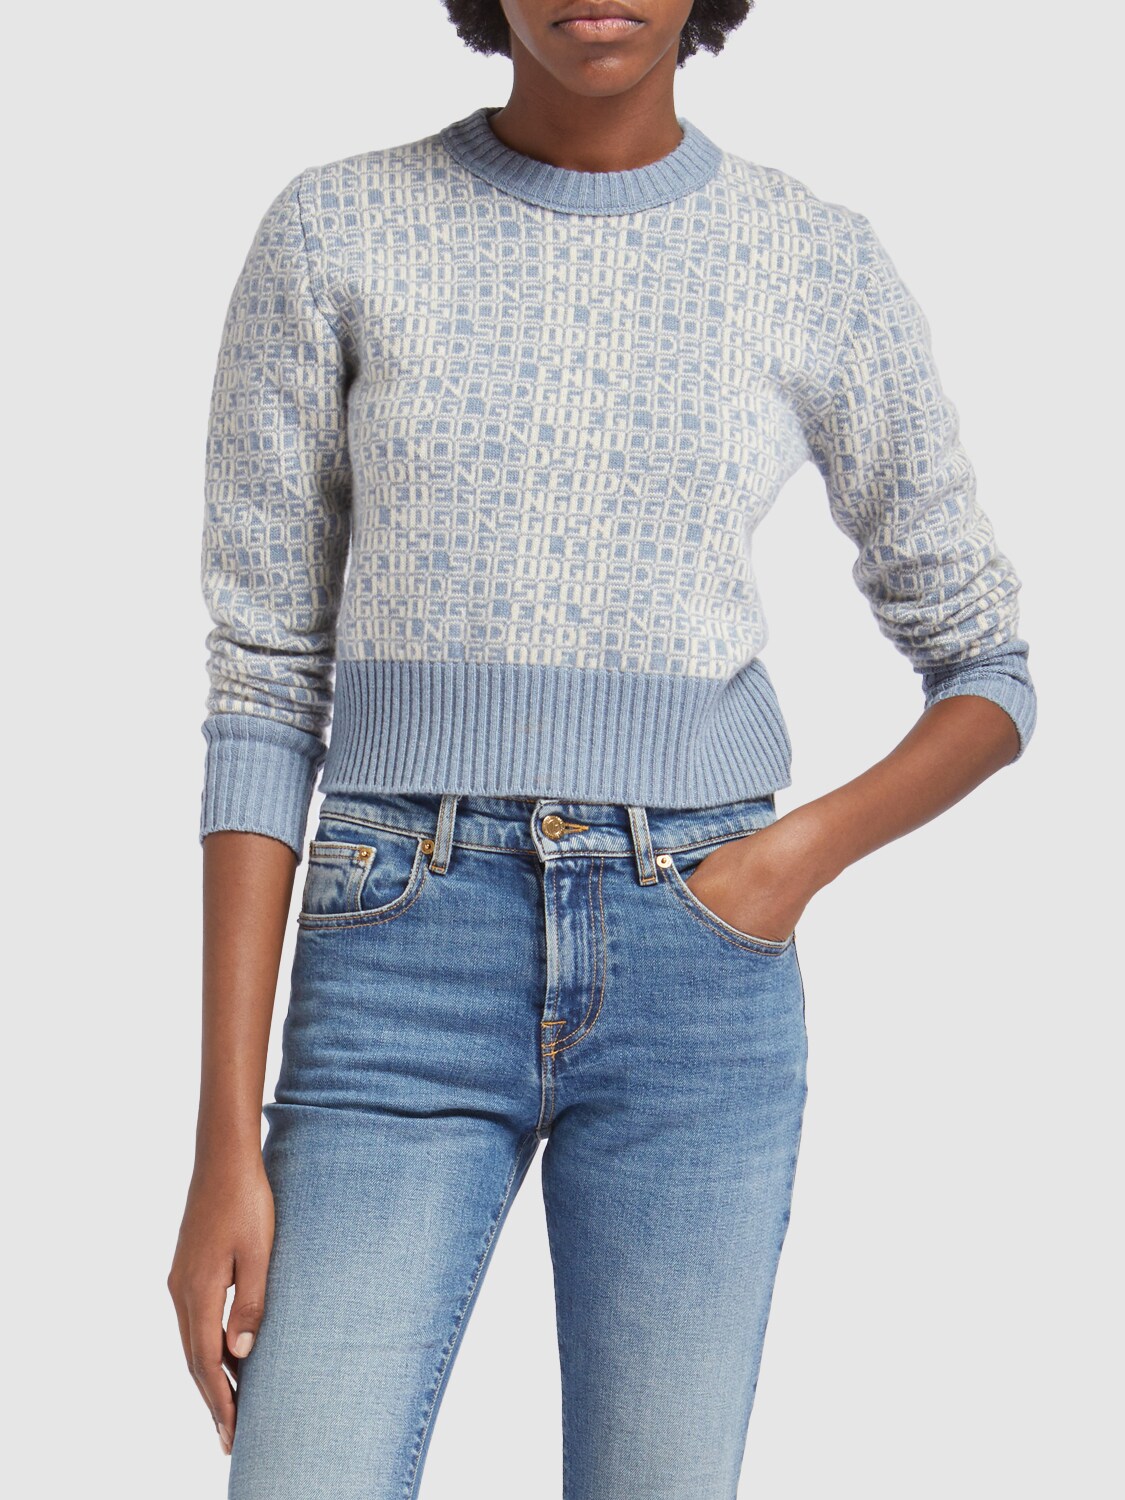 Shop Golden Goose Journey Wool Blend Knit Cropped Sweater In Spring Lake